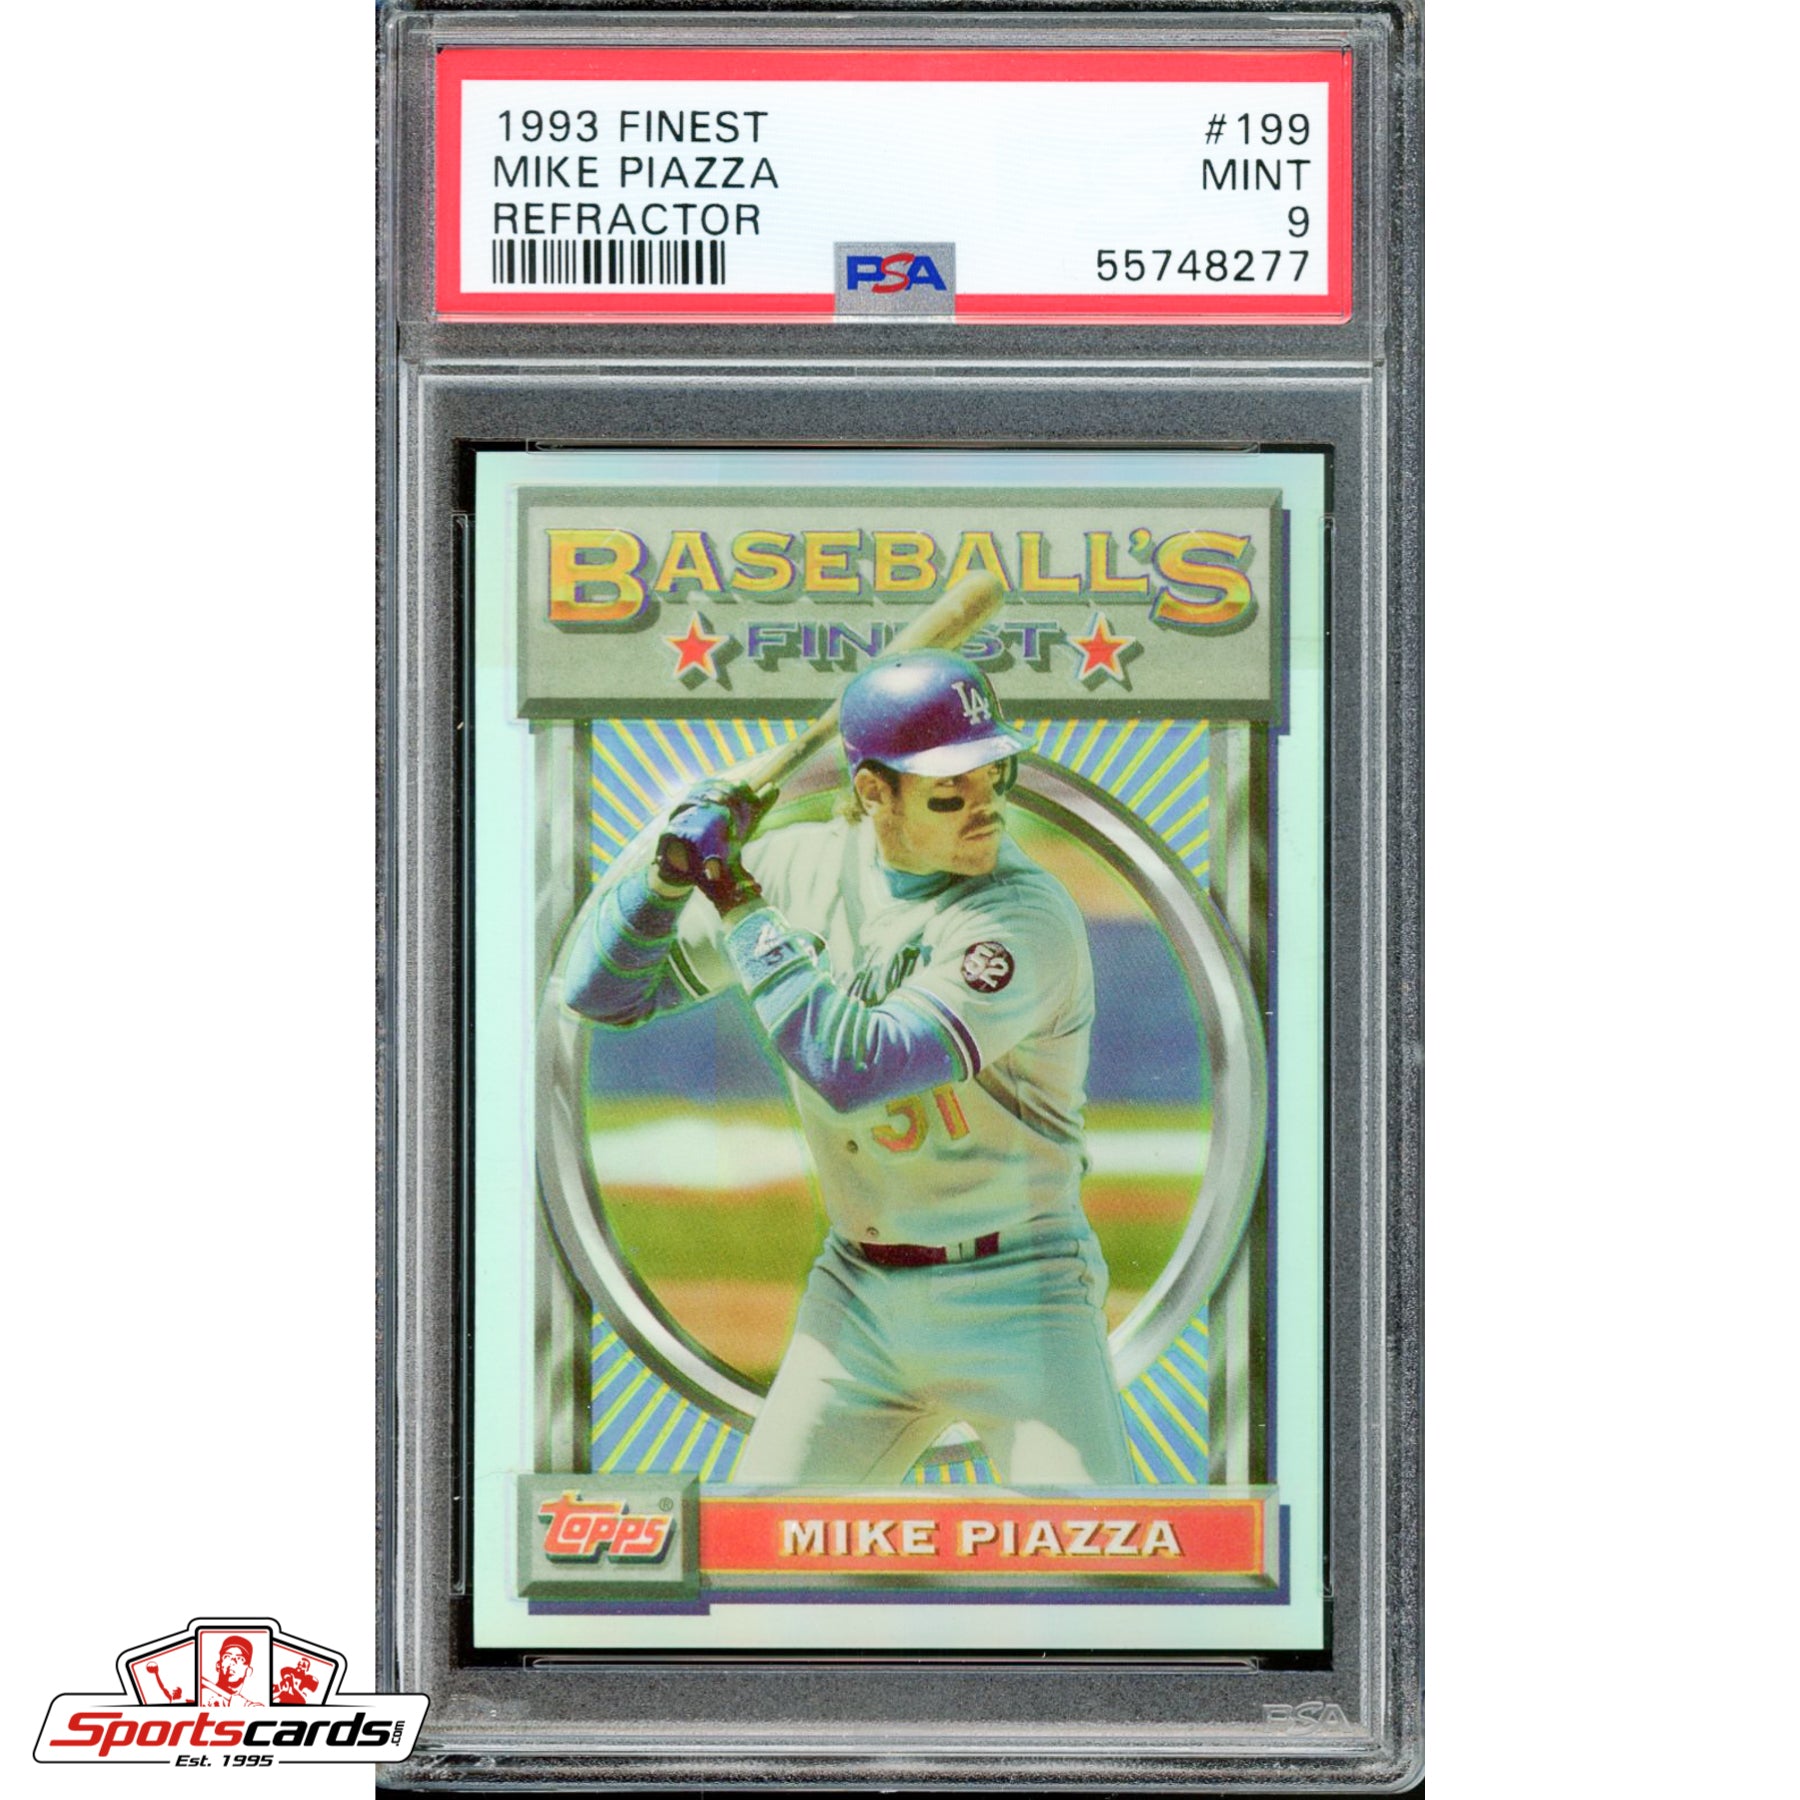 1993 Finest Mike Piazza Refractor #199 PSA 9